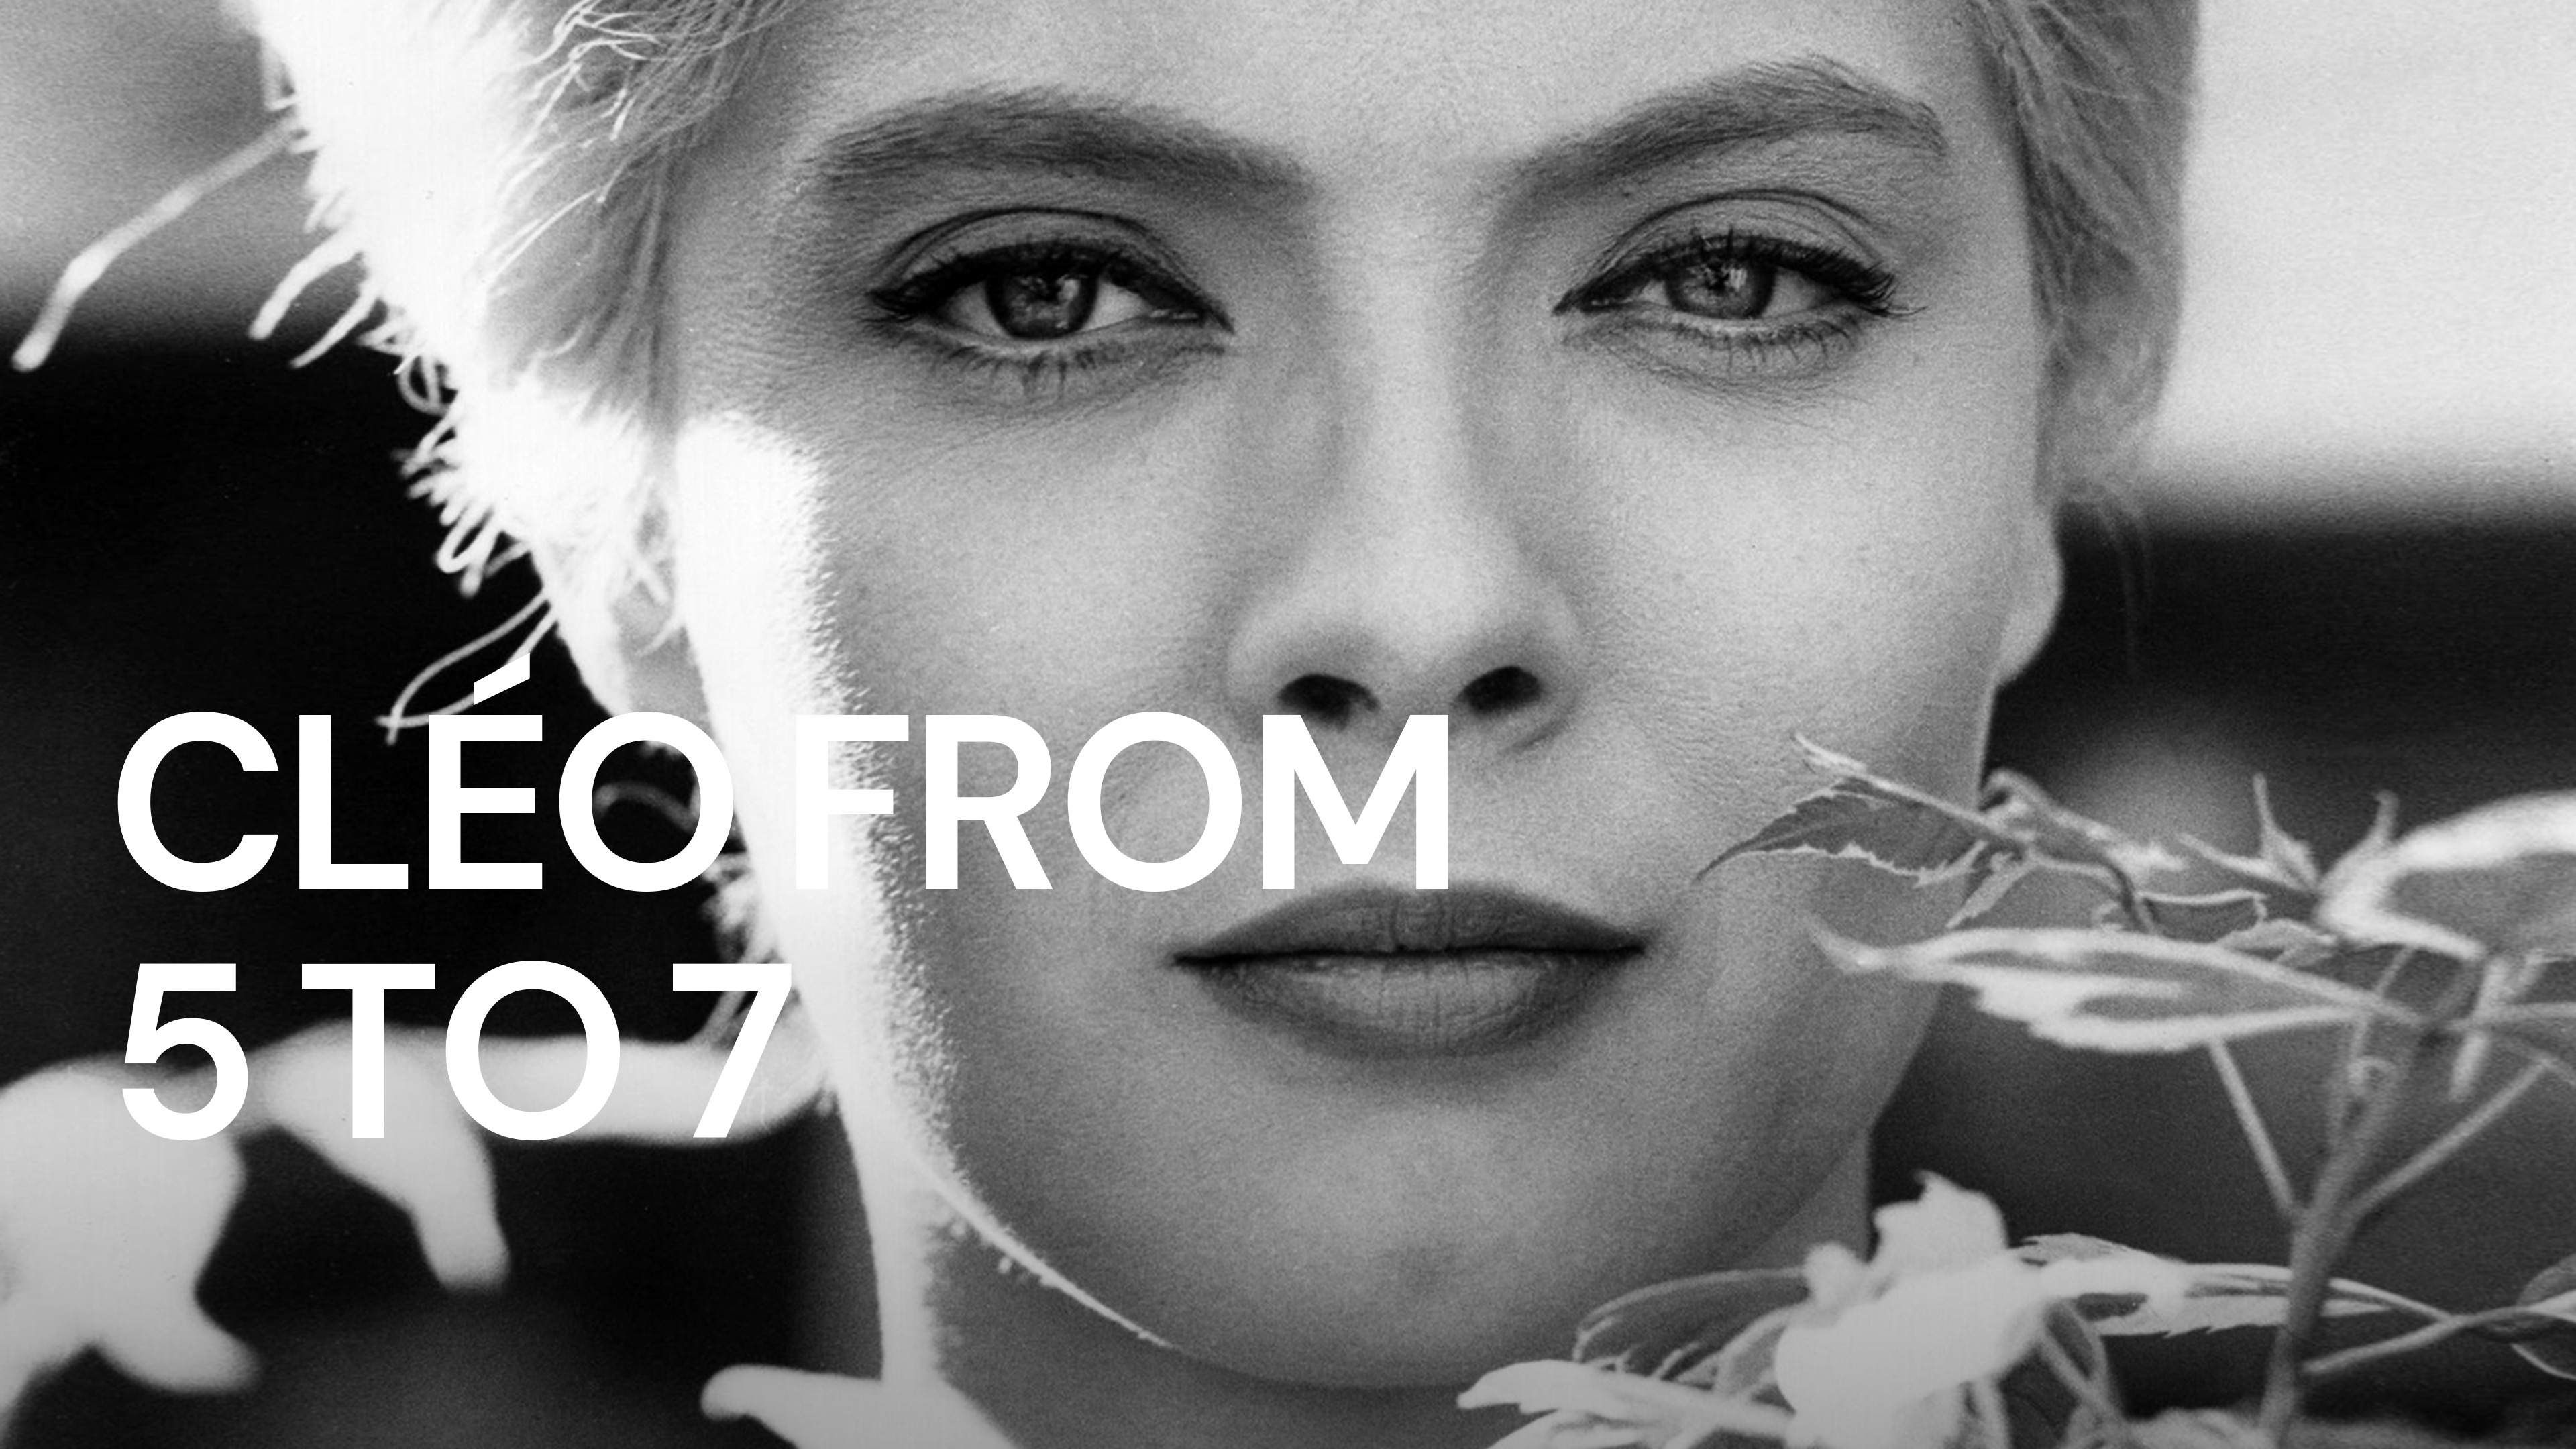 35 Facts about the movie Cleo from 5 to 7 - Facts.net